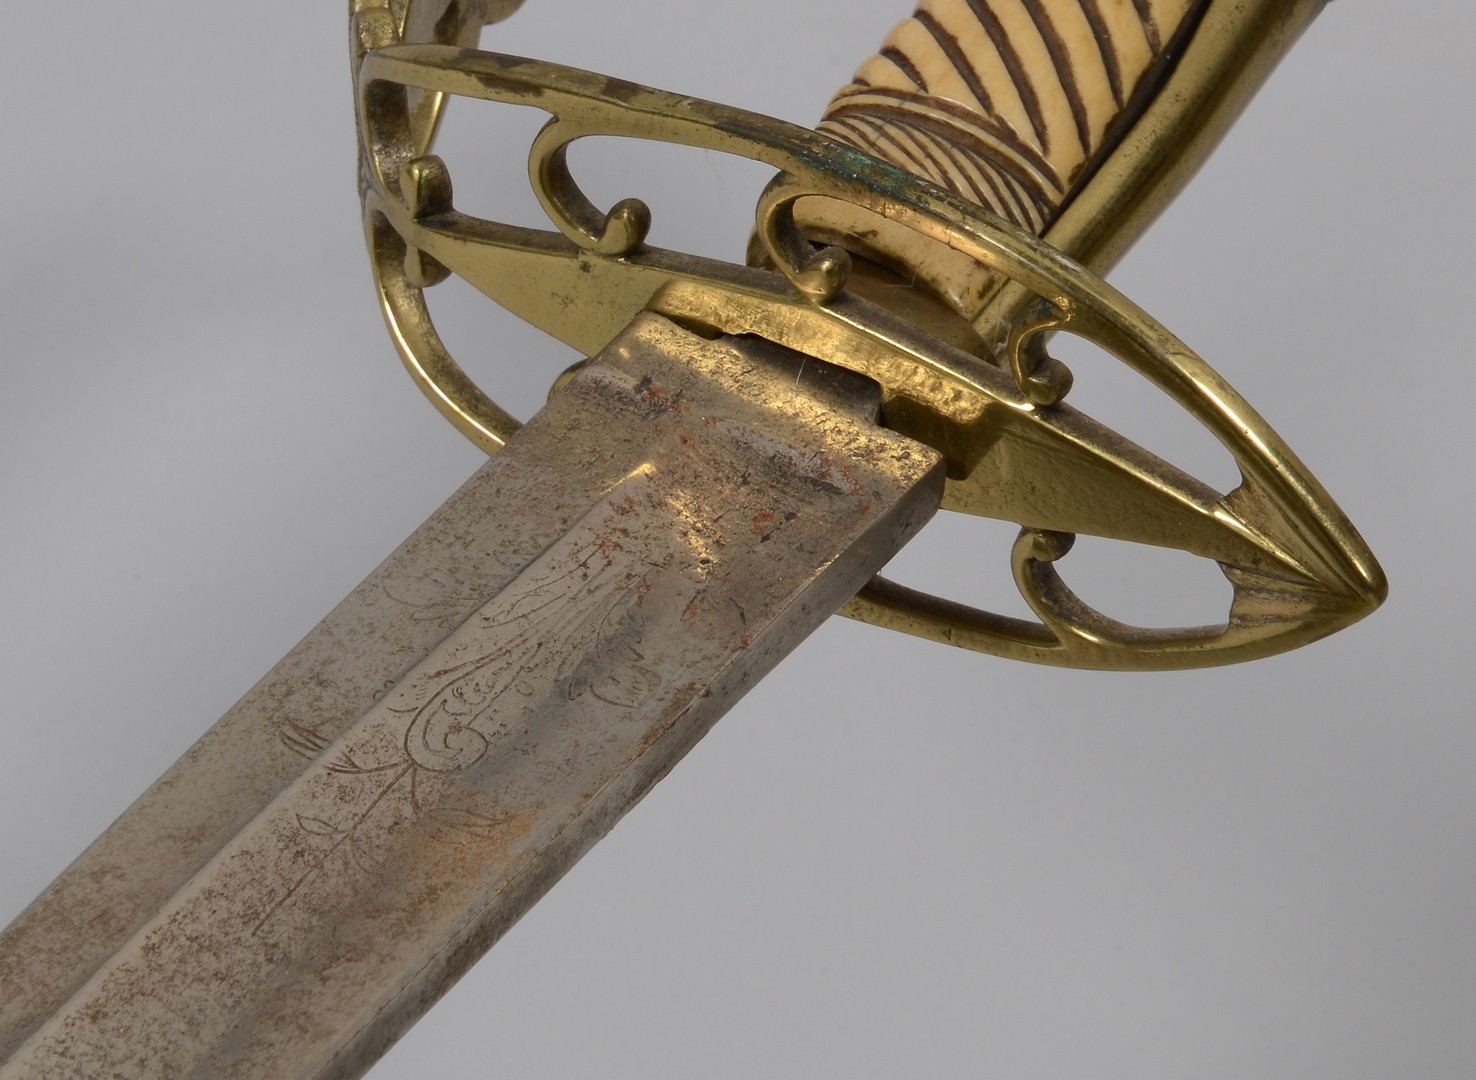 Lot 195: Early Military Sword of Alexander MicMillan, Tennessee